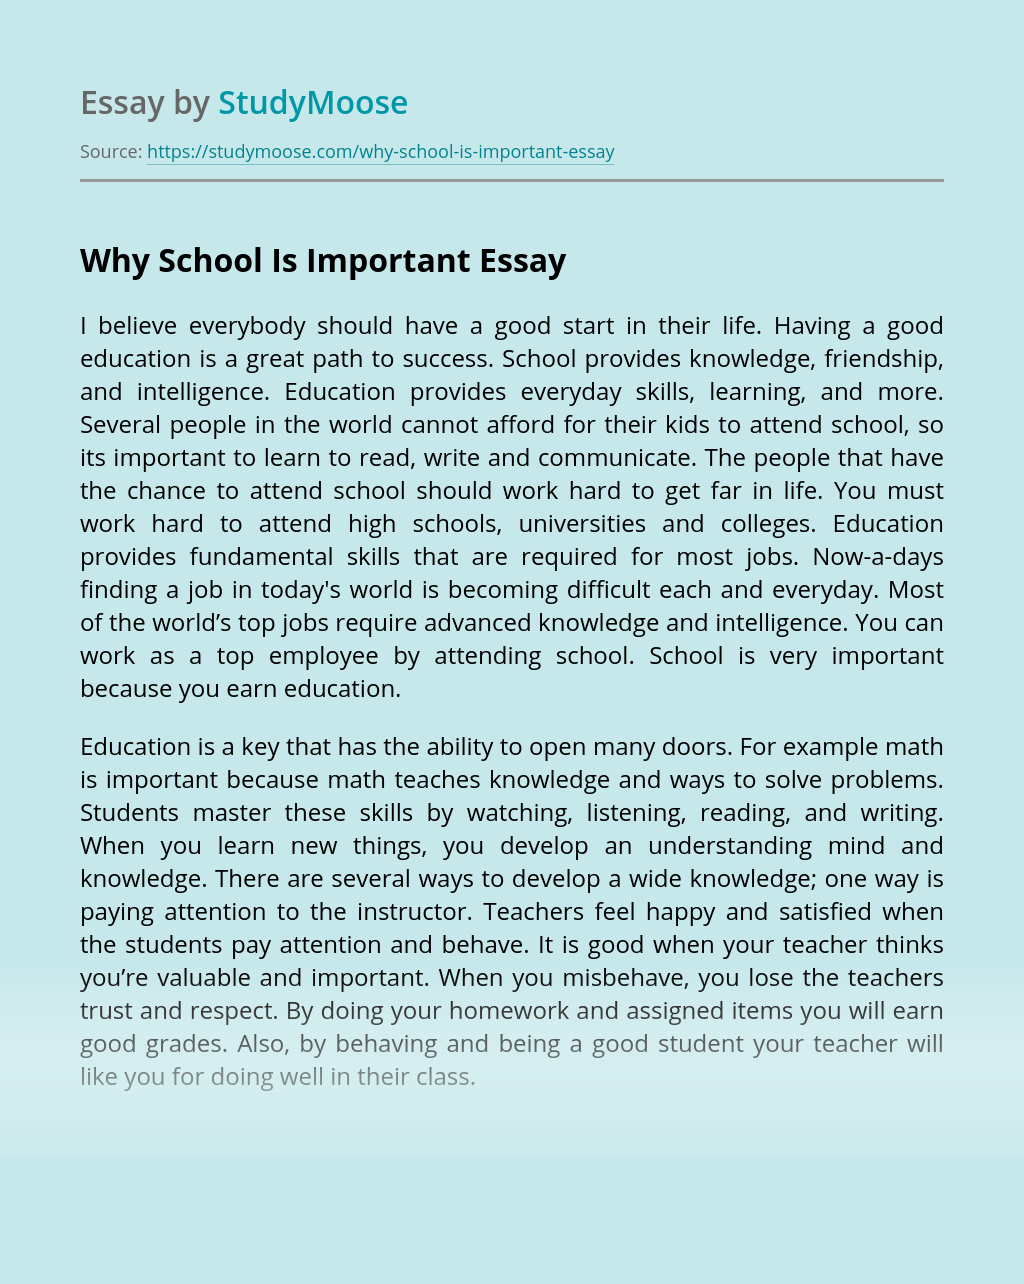 Why Is School Important Essay?